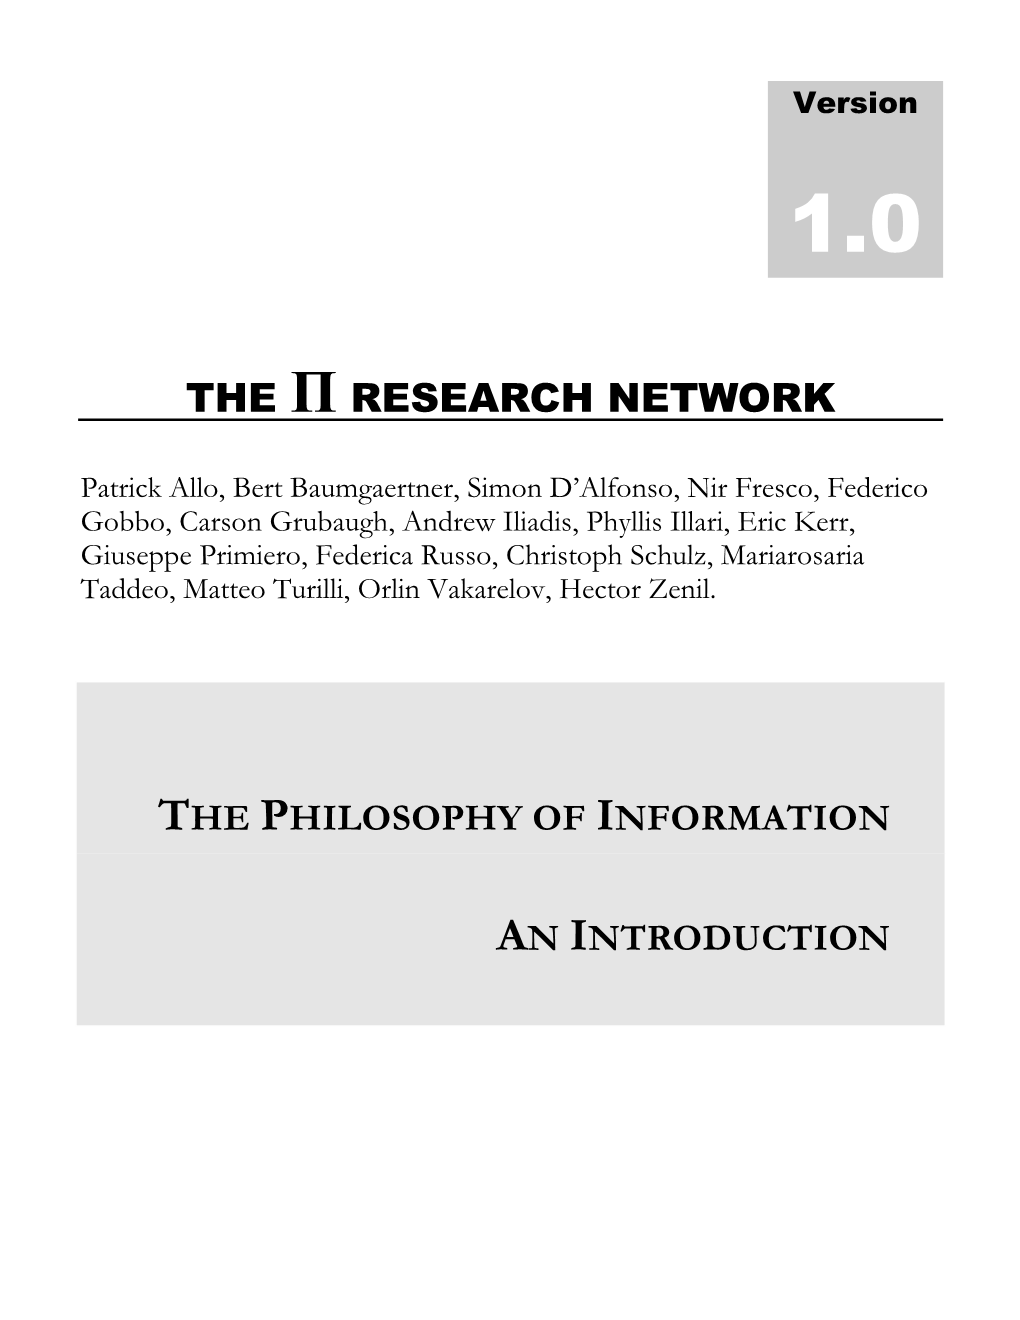 The Π Research Network